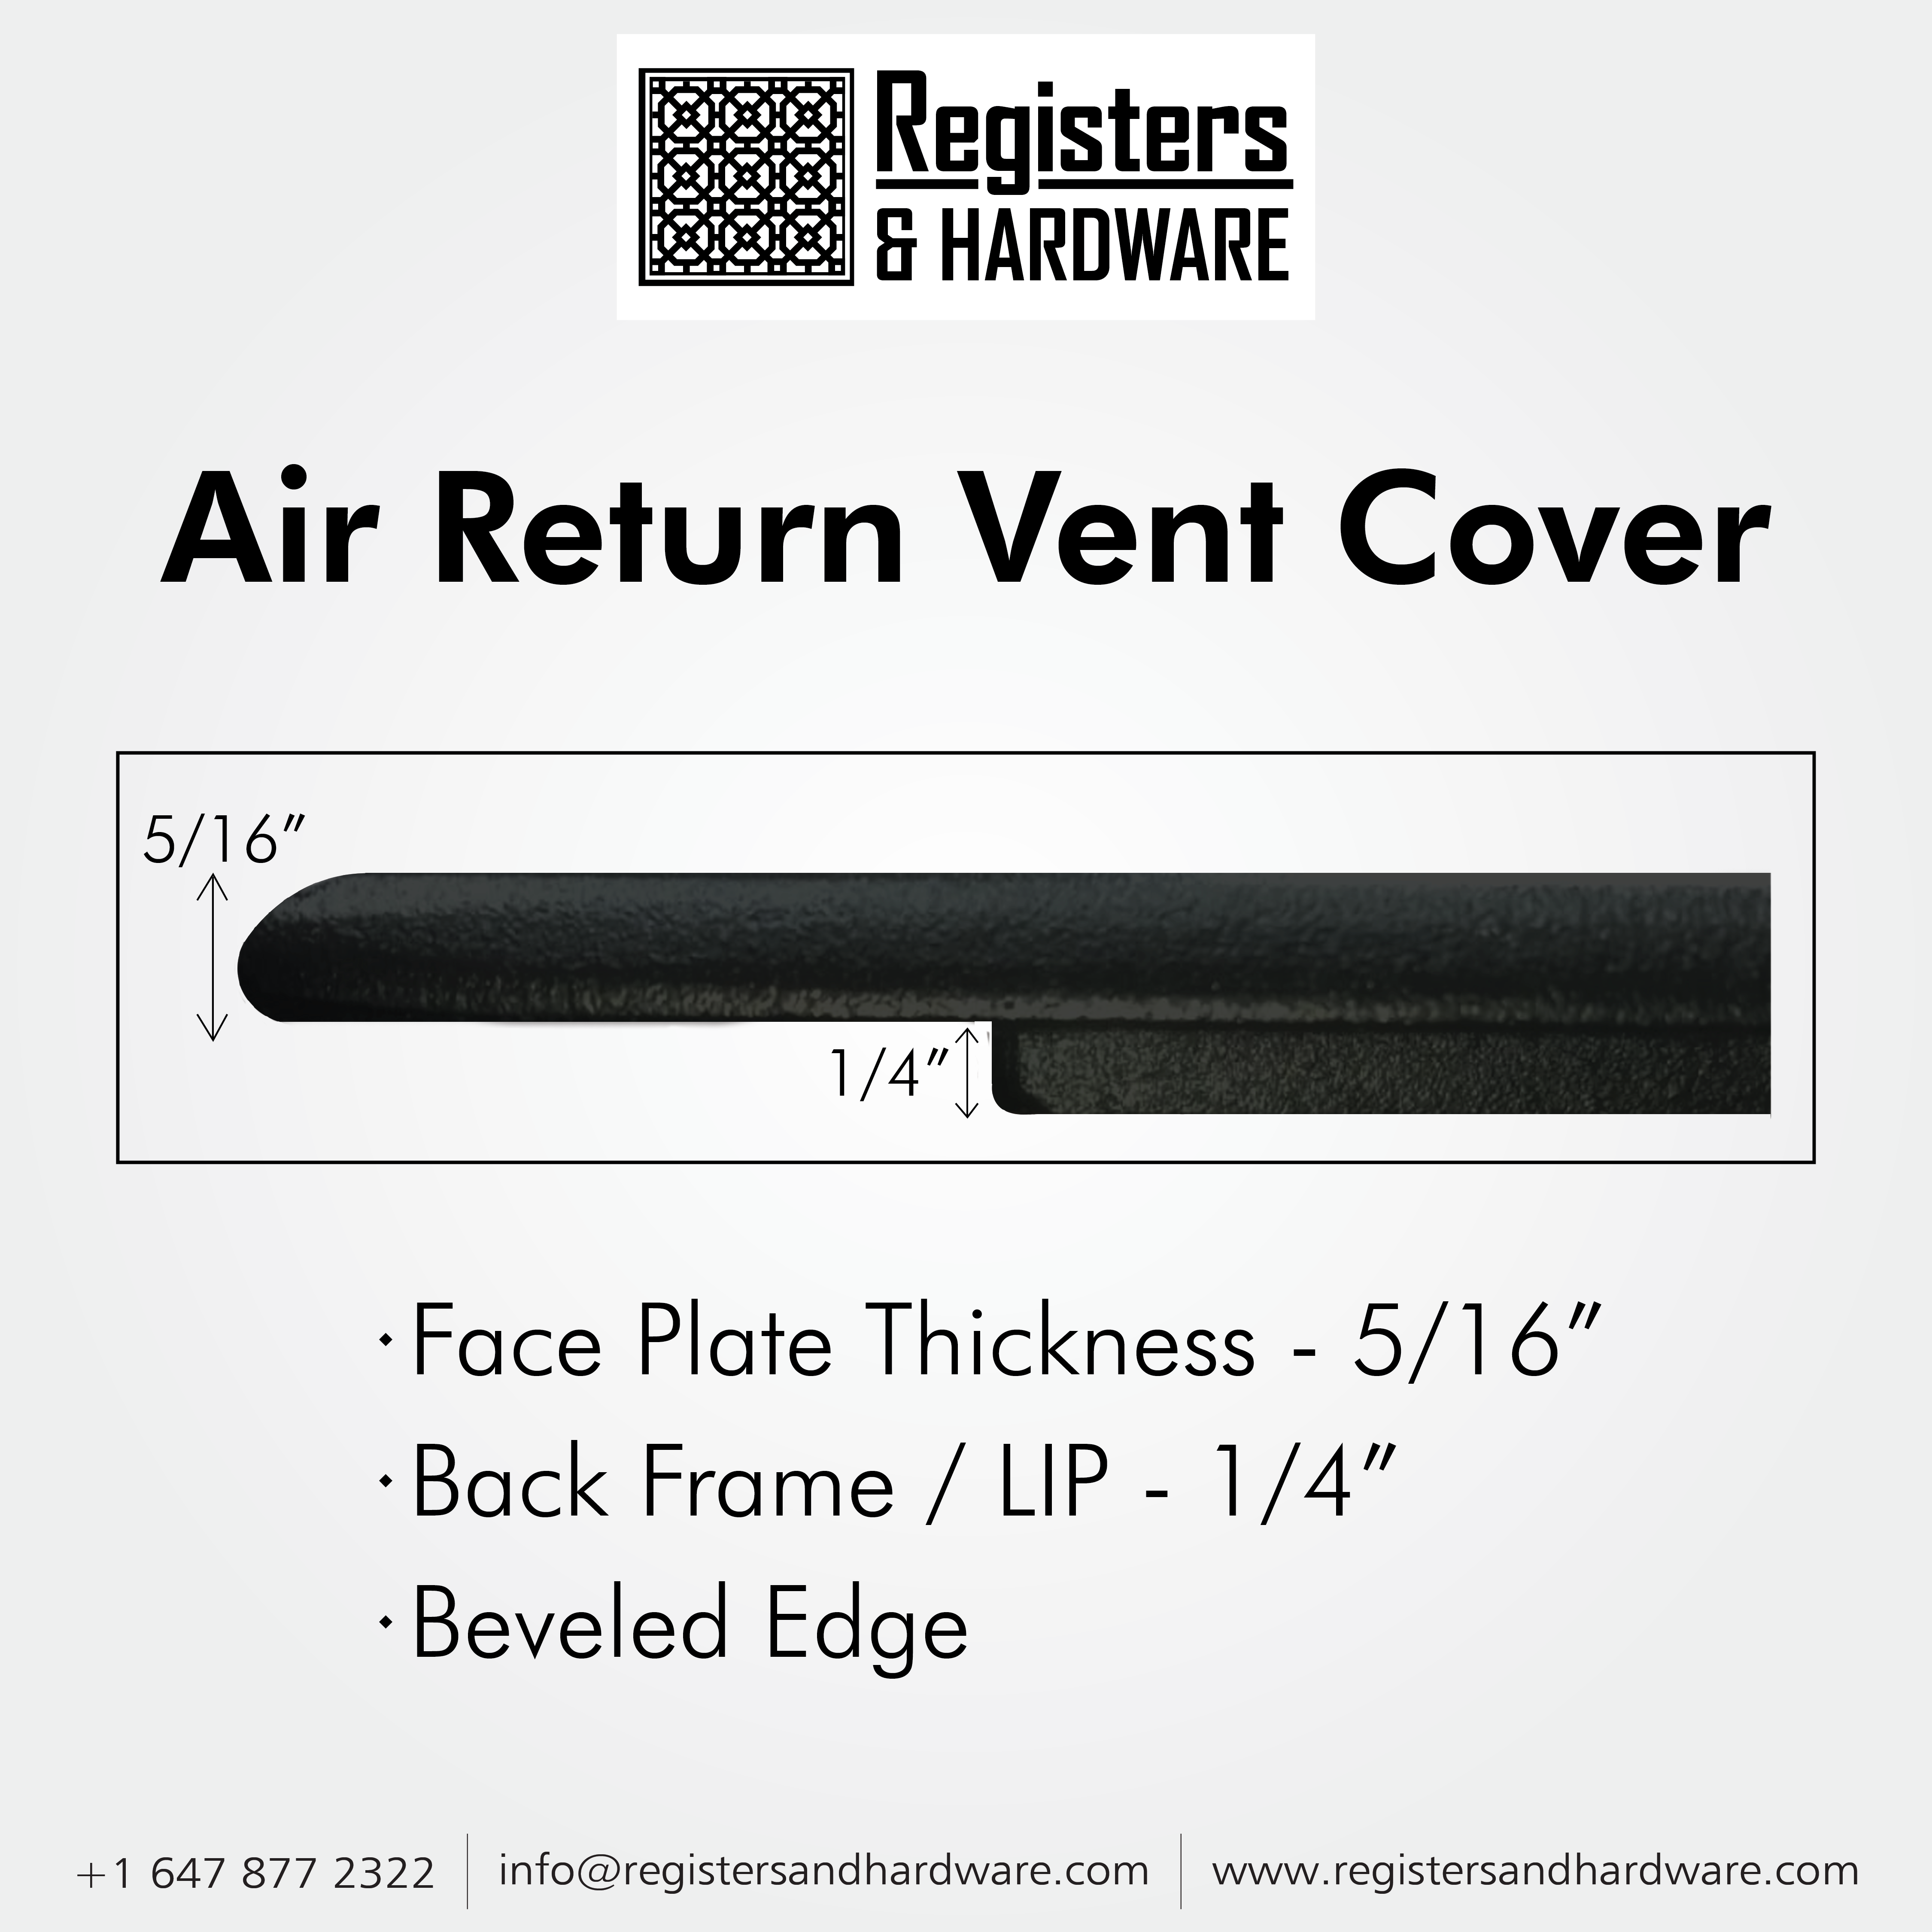 Achtek AIR RETURN 20"x25" Duct Opening (Overall Size 22"x27") | Heavy Cast Aluminum Air Grille HVAC Duct || Powder Coated